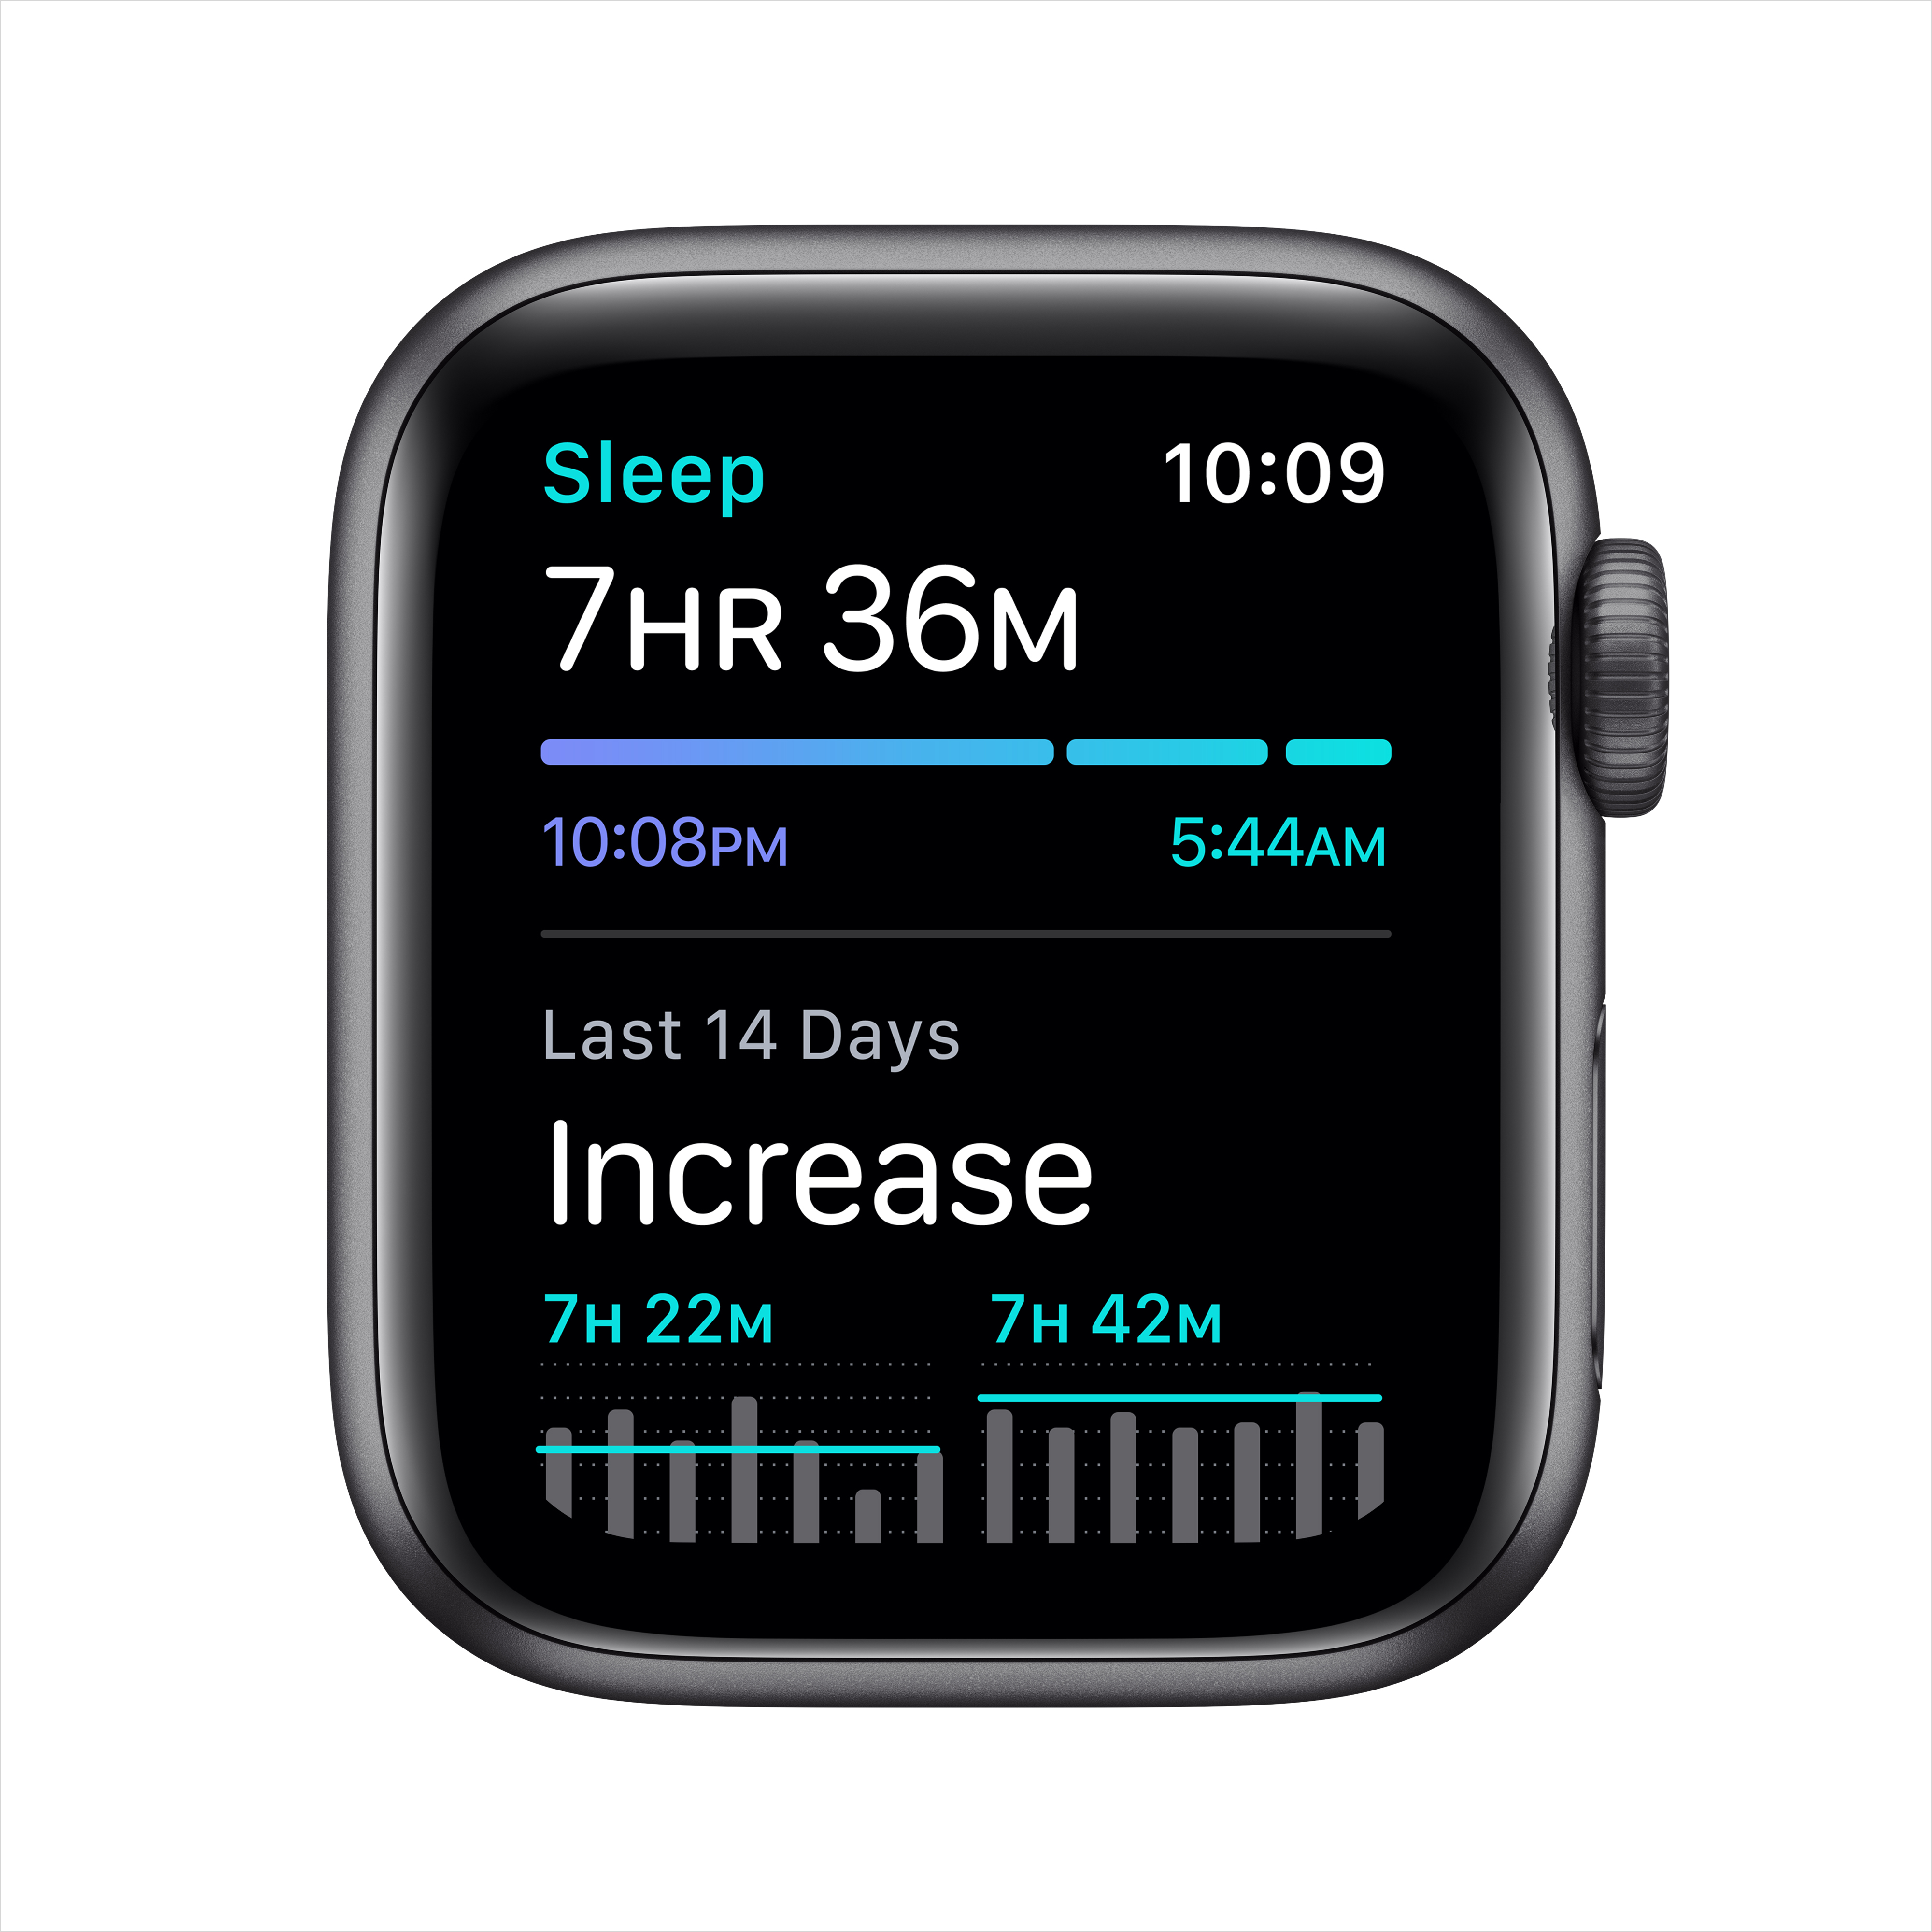 Apple Watch SE (1st Gen) GPS, 40mm Space Gray Aluminum Case with Black Sport Band - Regular - image 5 of 9